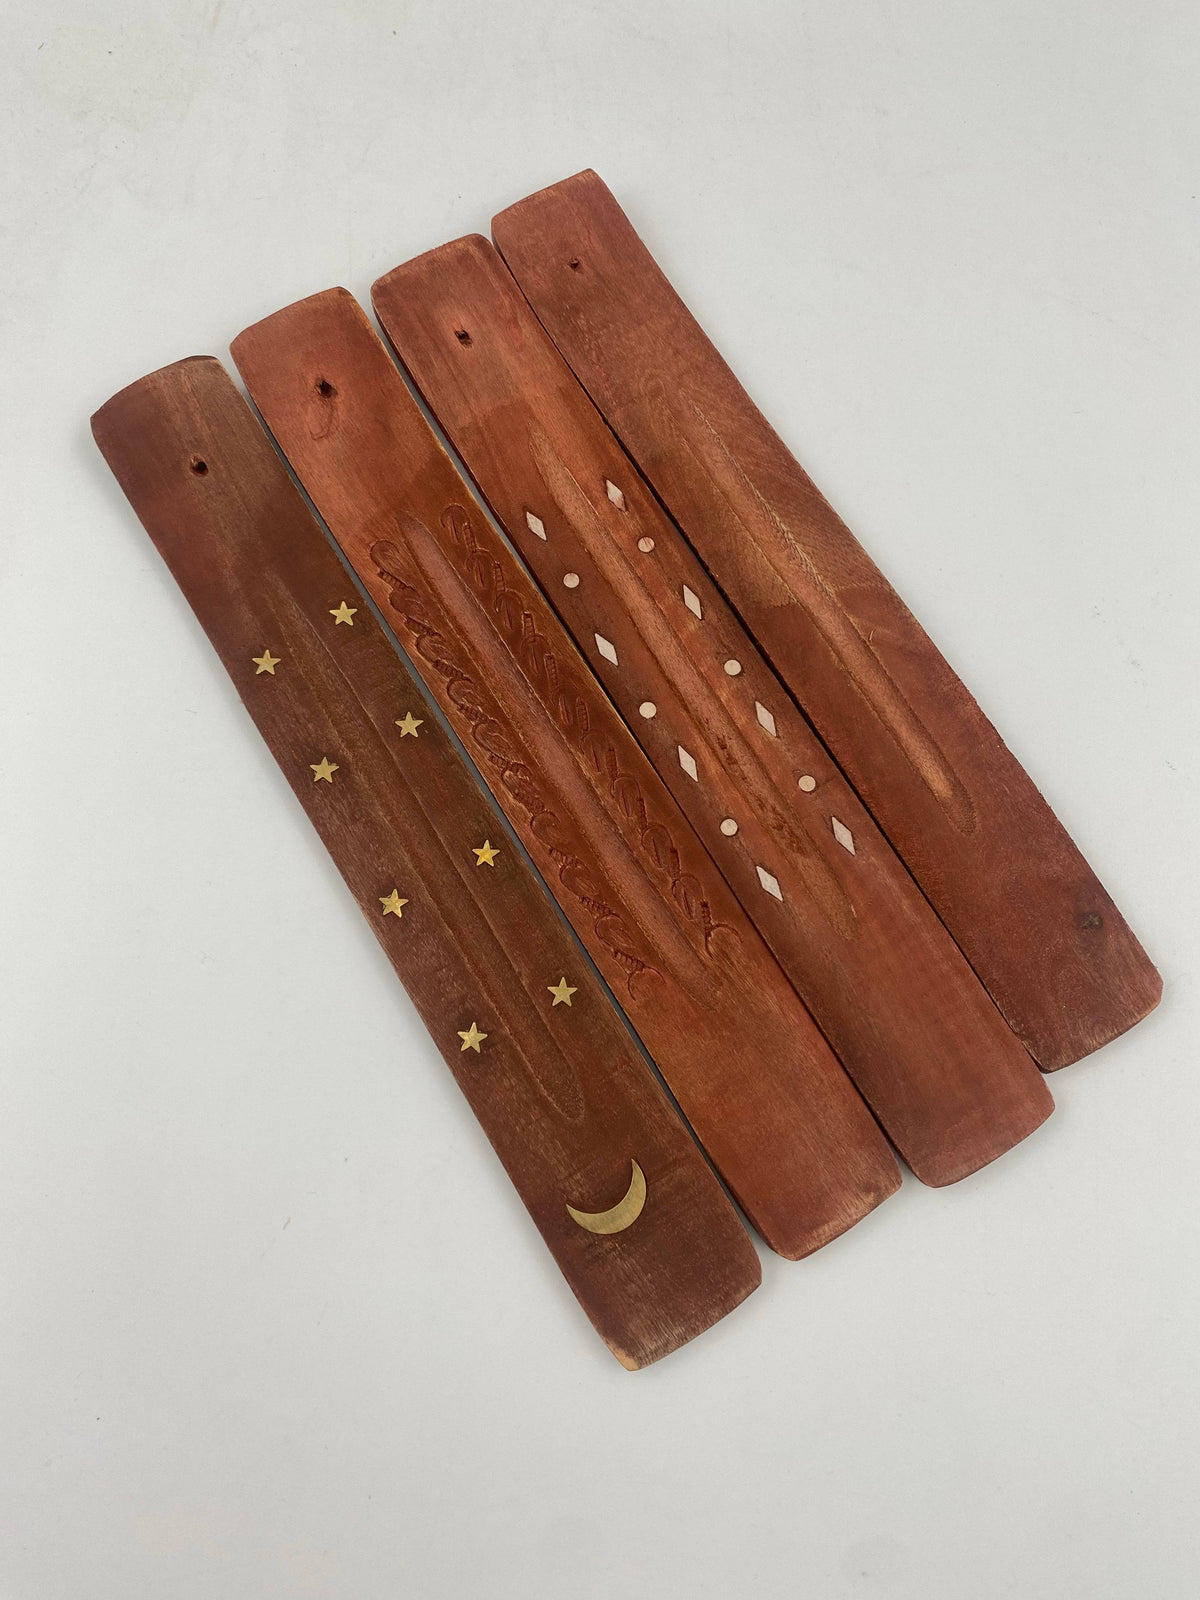 Assorted Wooden Incense Burners 12 ct